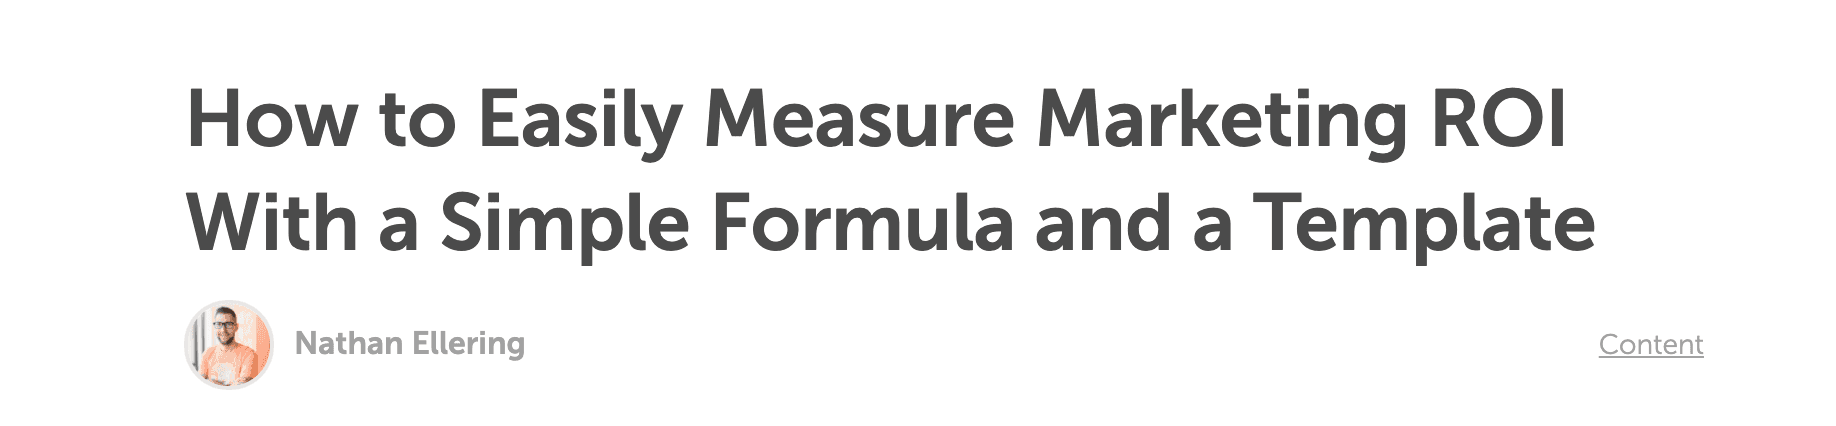 How to Easily Measure Marketing ROI With a Simple Formula and a Template